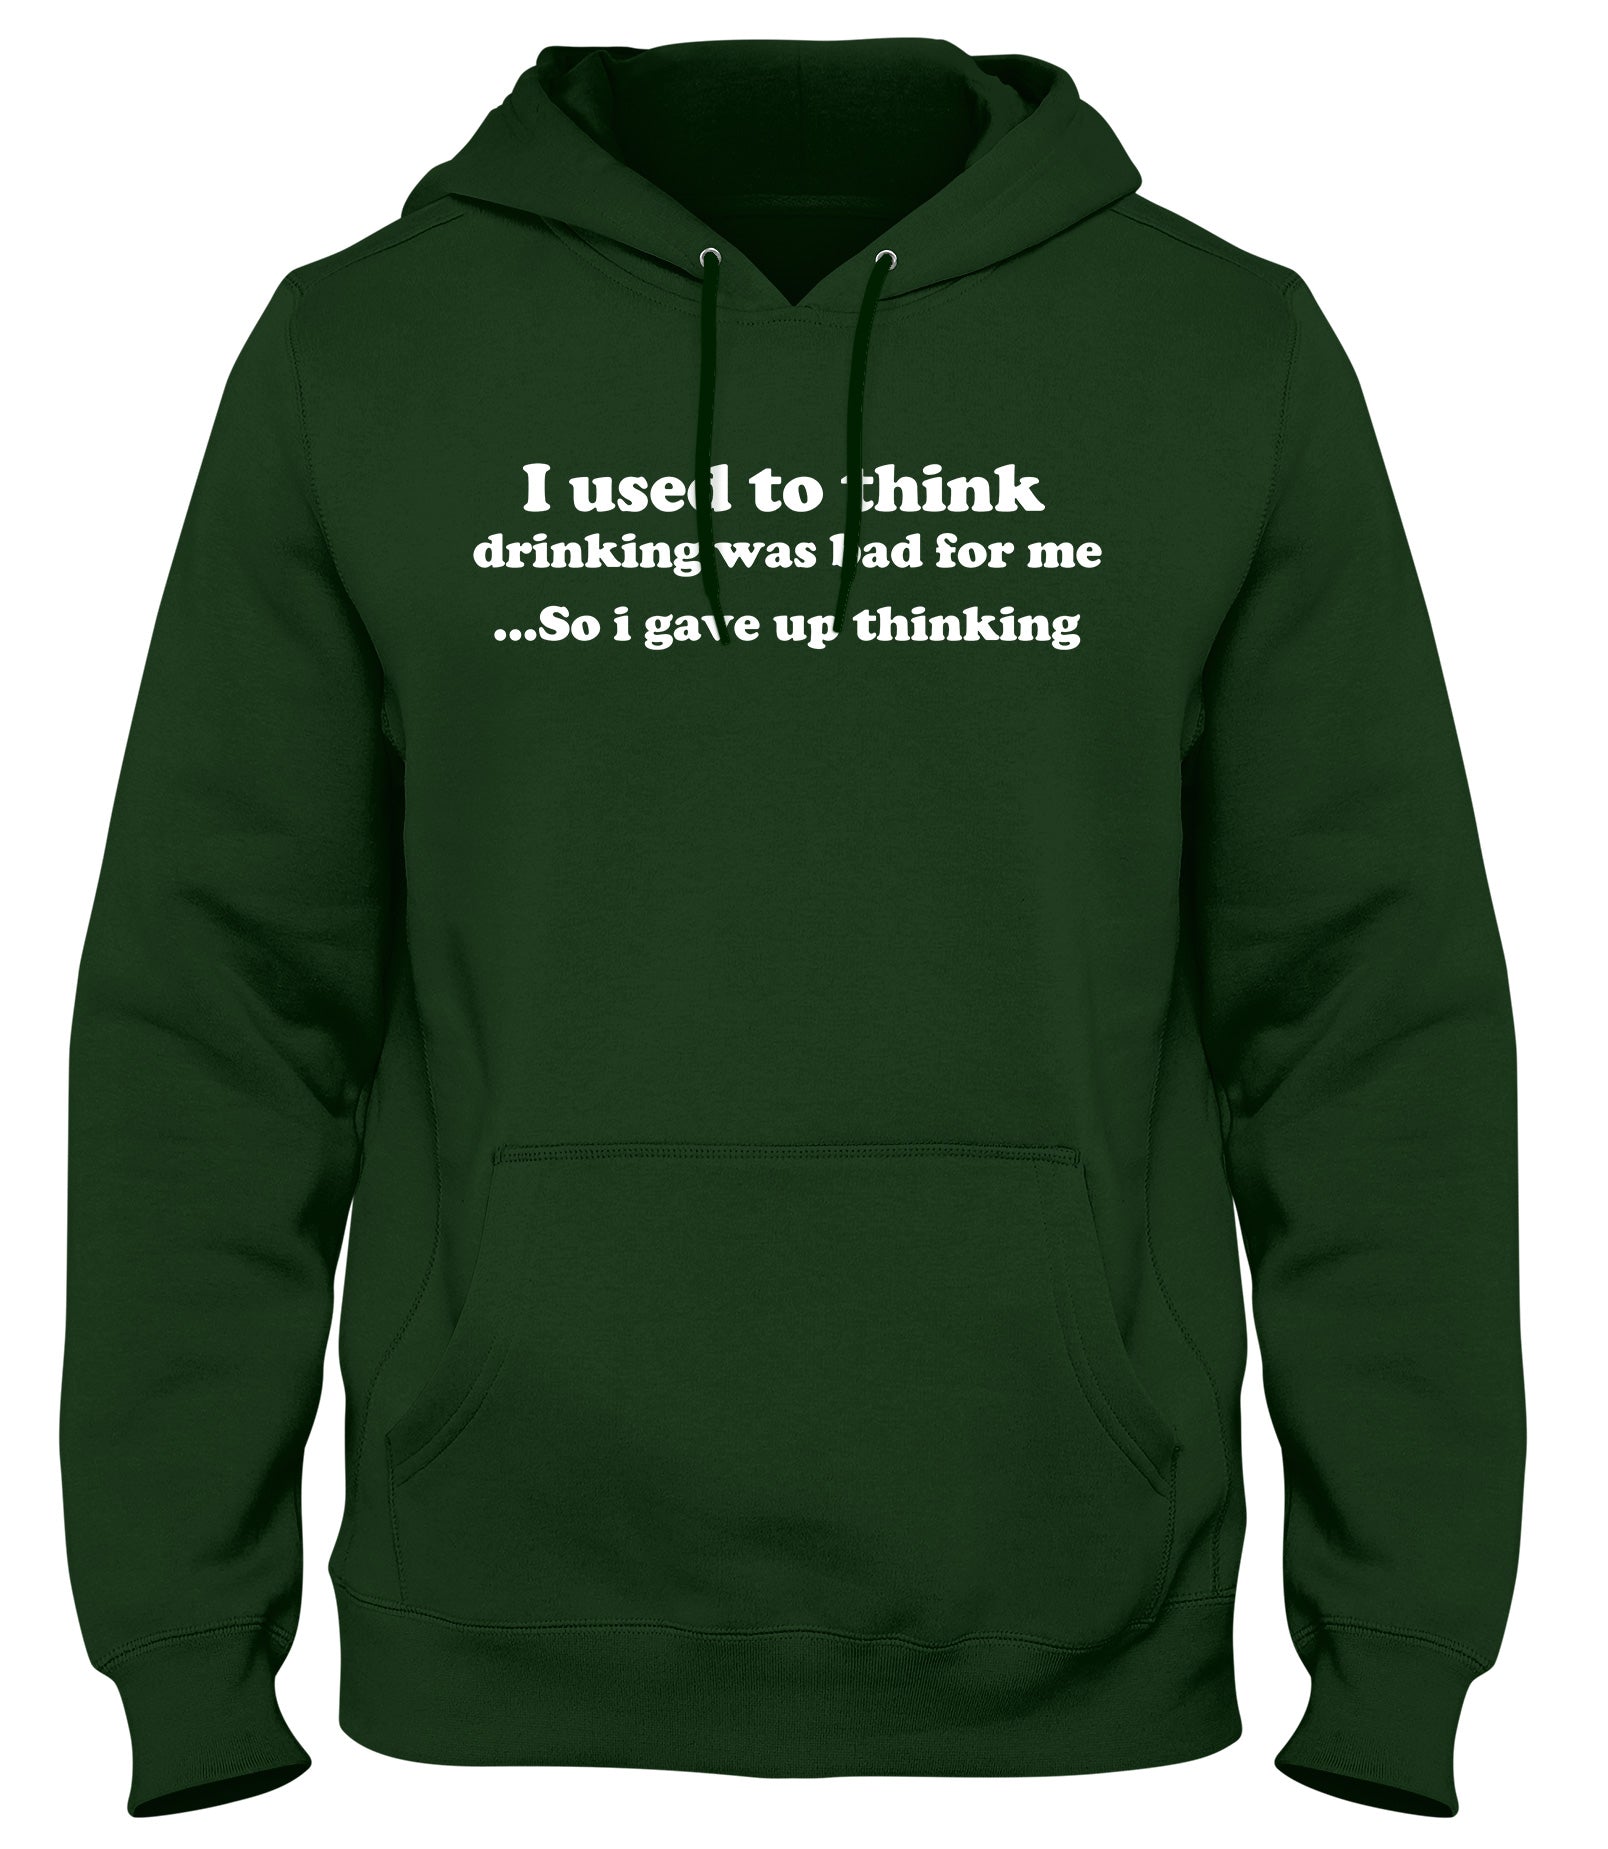 I USED TO THINK DRINKING WAS BAD FOR ME SO I GAVE UP THINKING WOMENS LADIES MENS UNISEX HOODIE